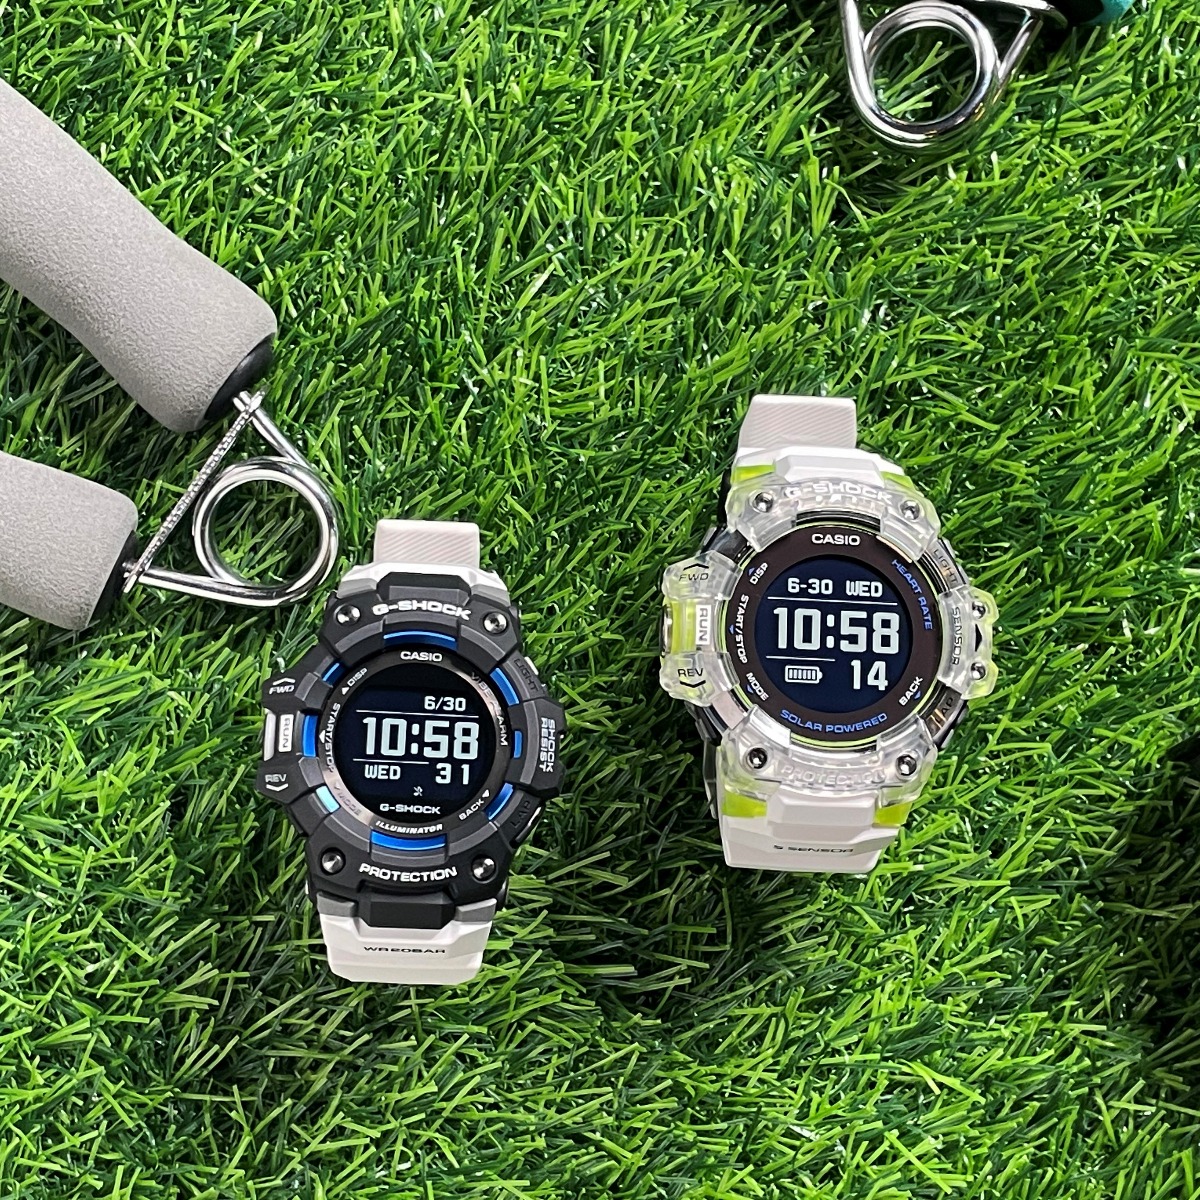 Professional Sporty and Edgy Watches